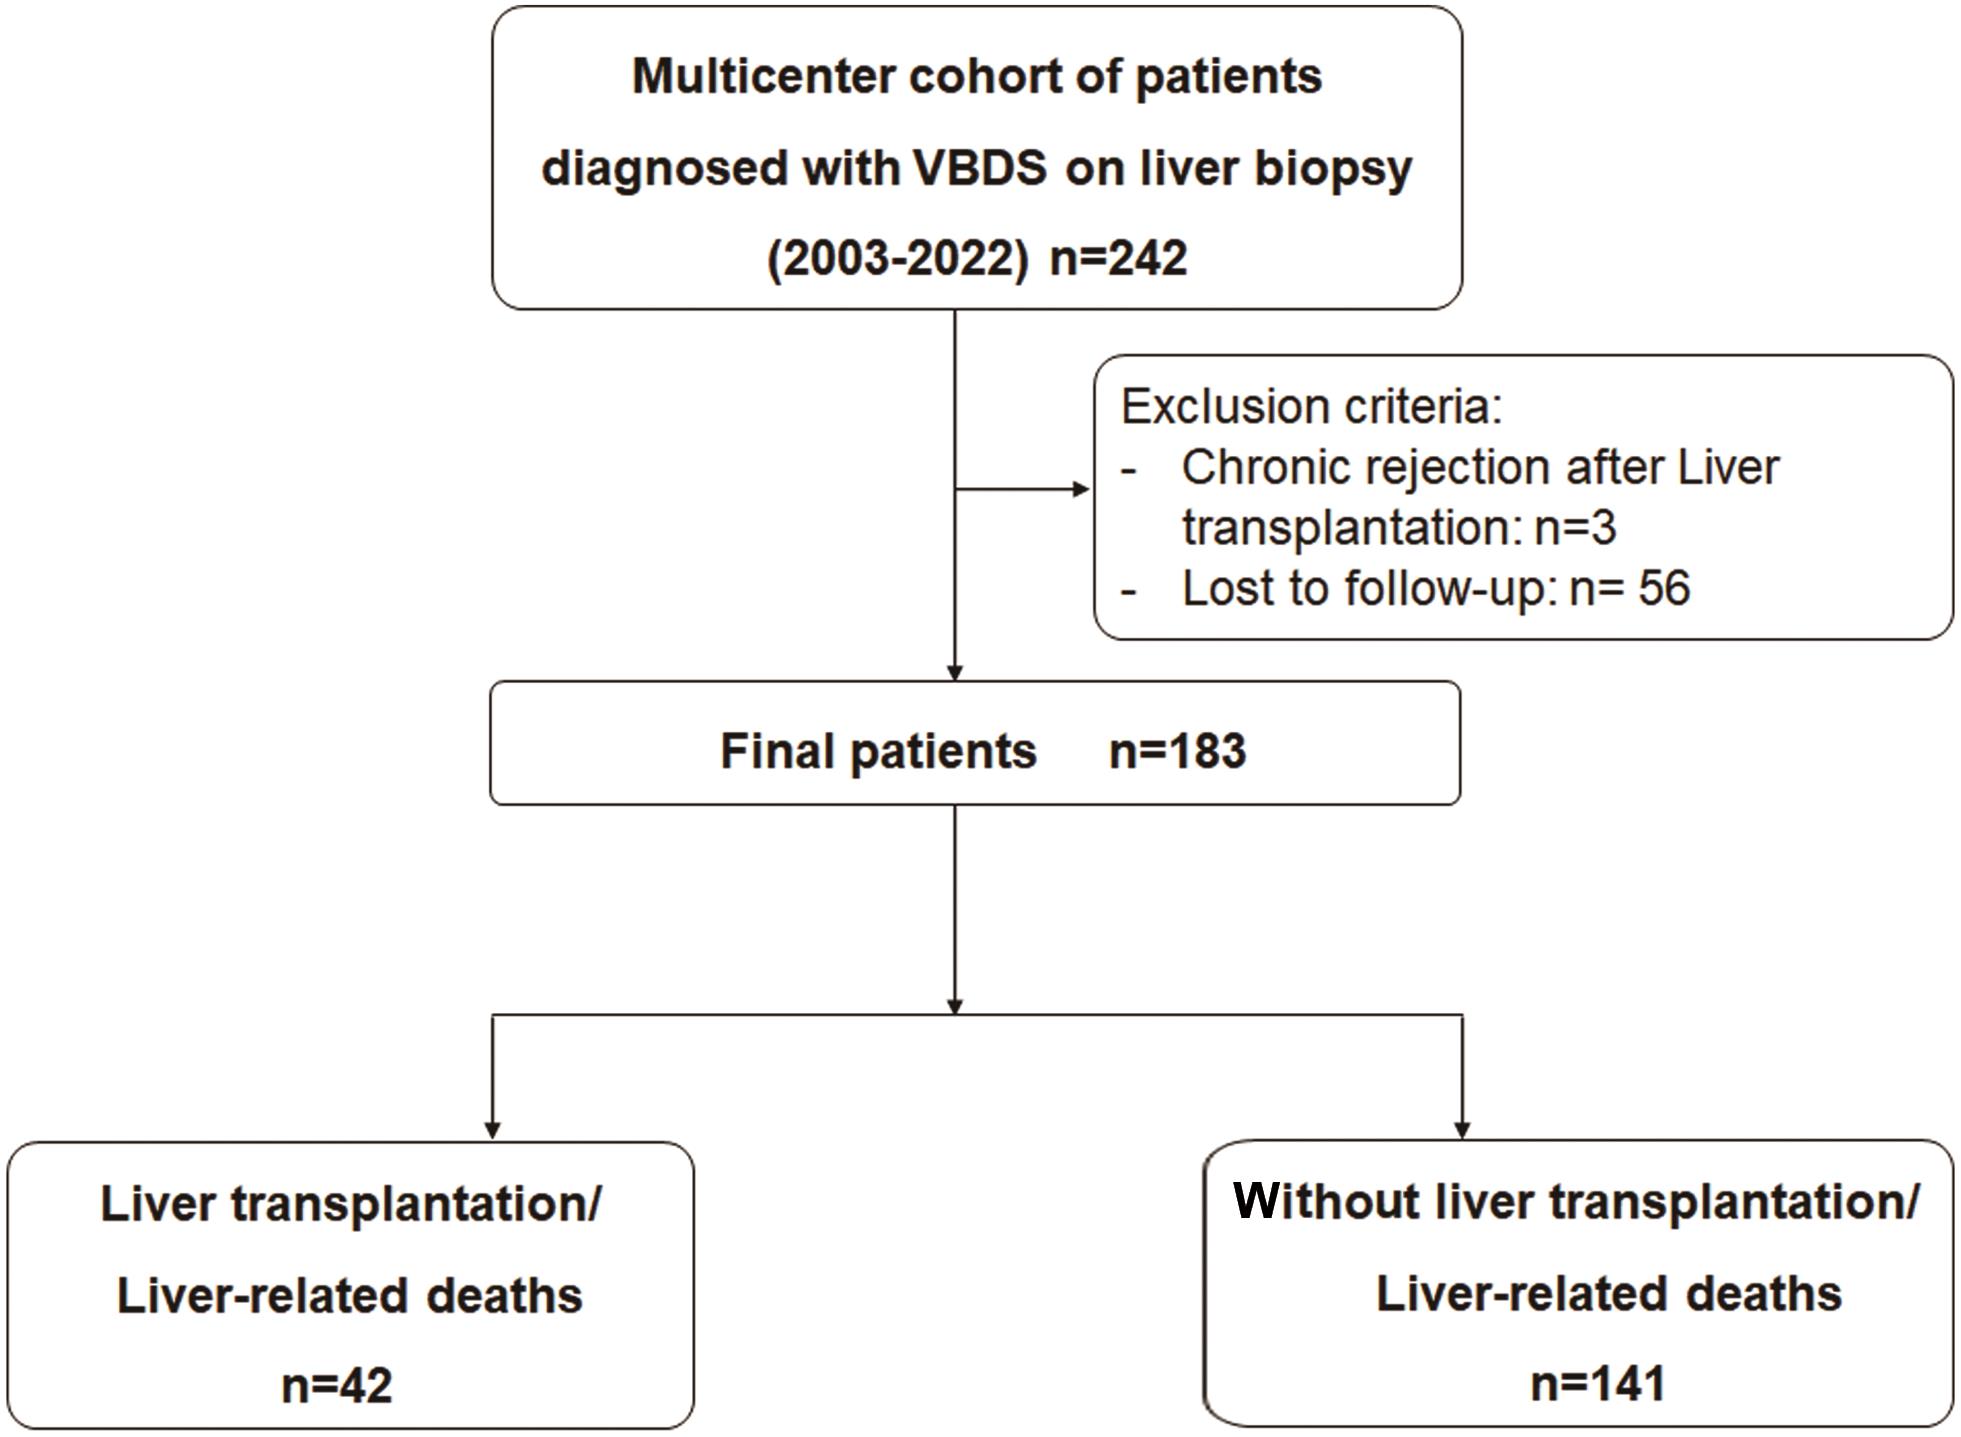 Flowchart of the retrospective multicenter cohort of patients diagnosed with VBDS on liver biopsy.